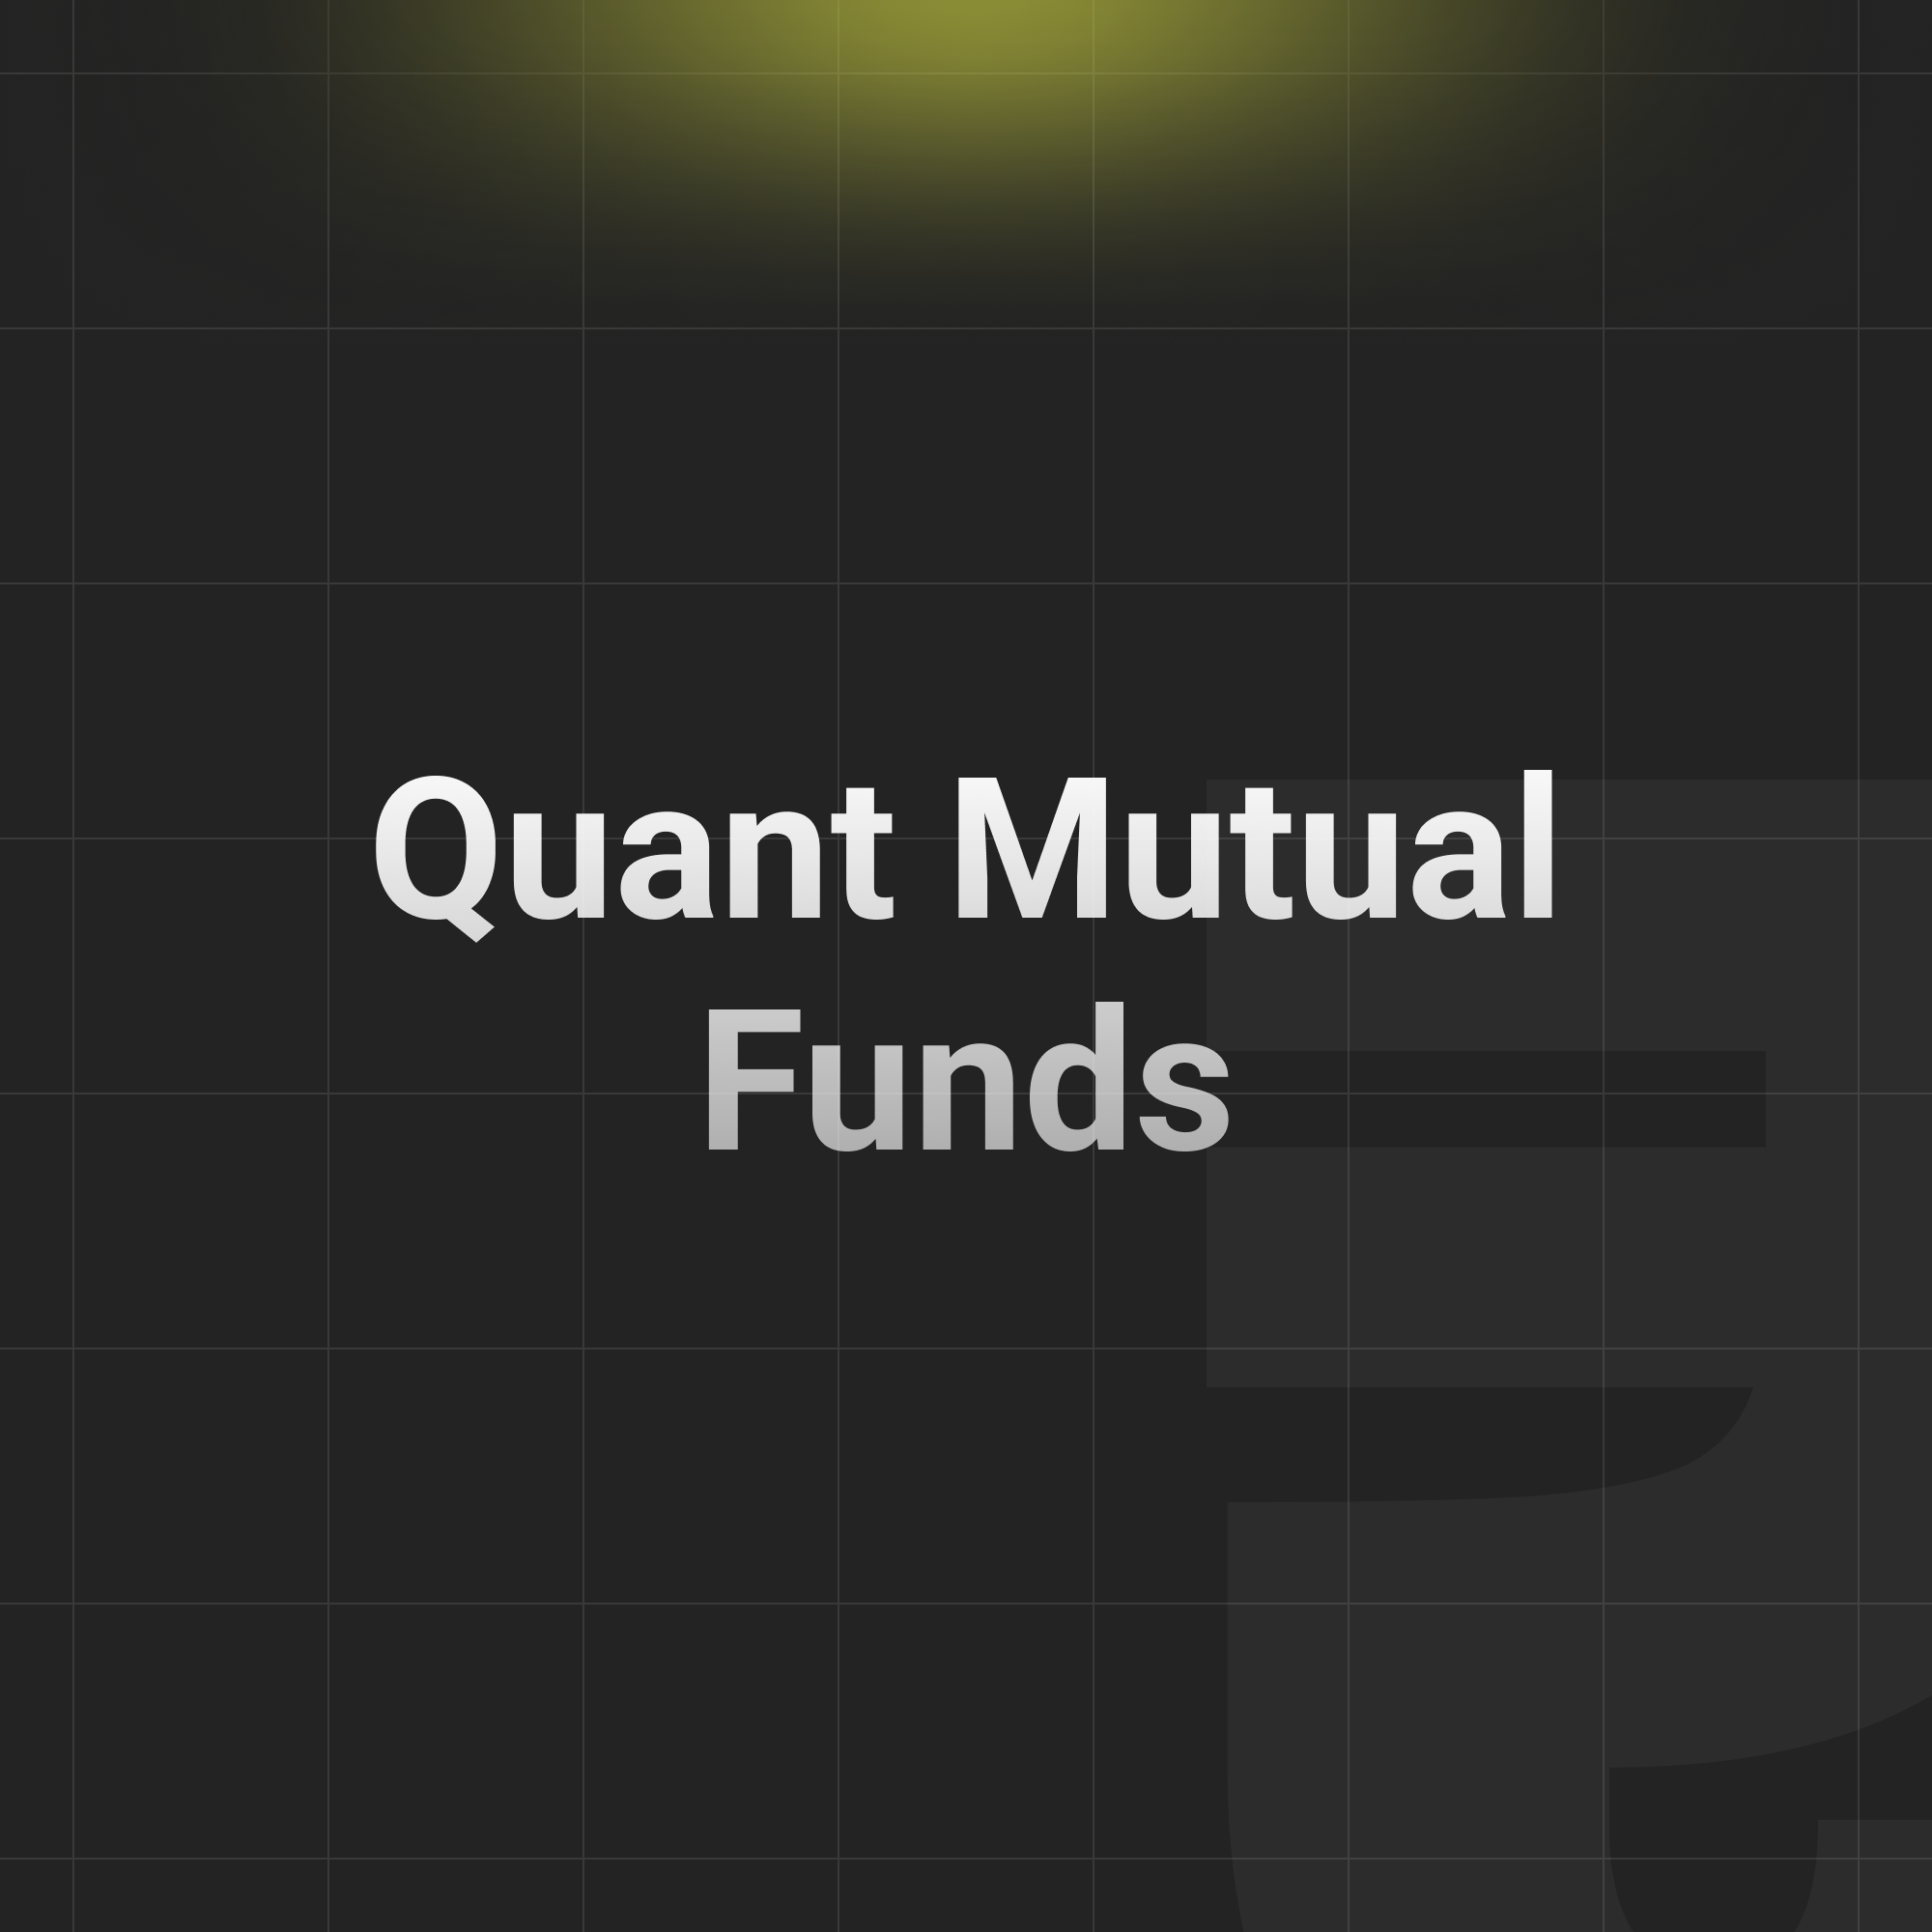 What are Quant Mutual Funds?